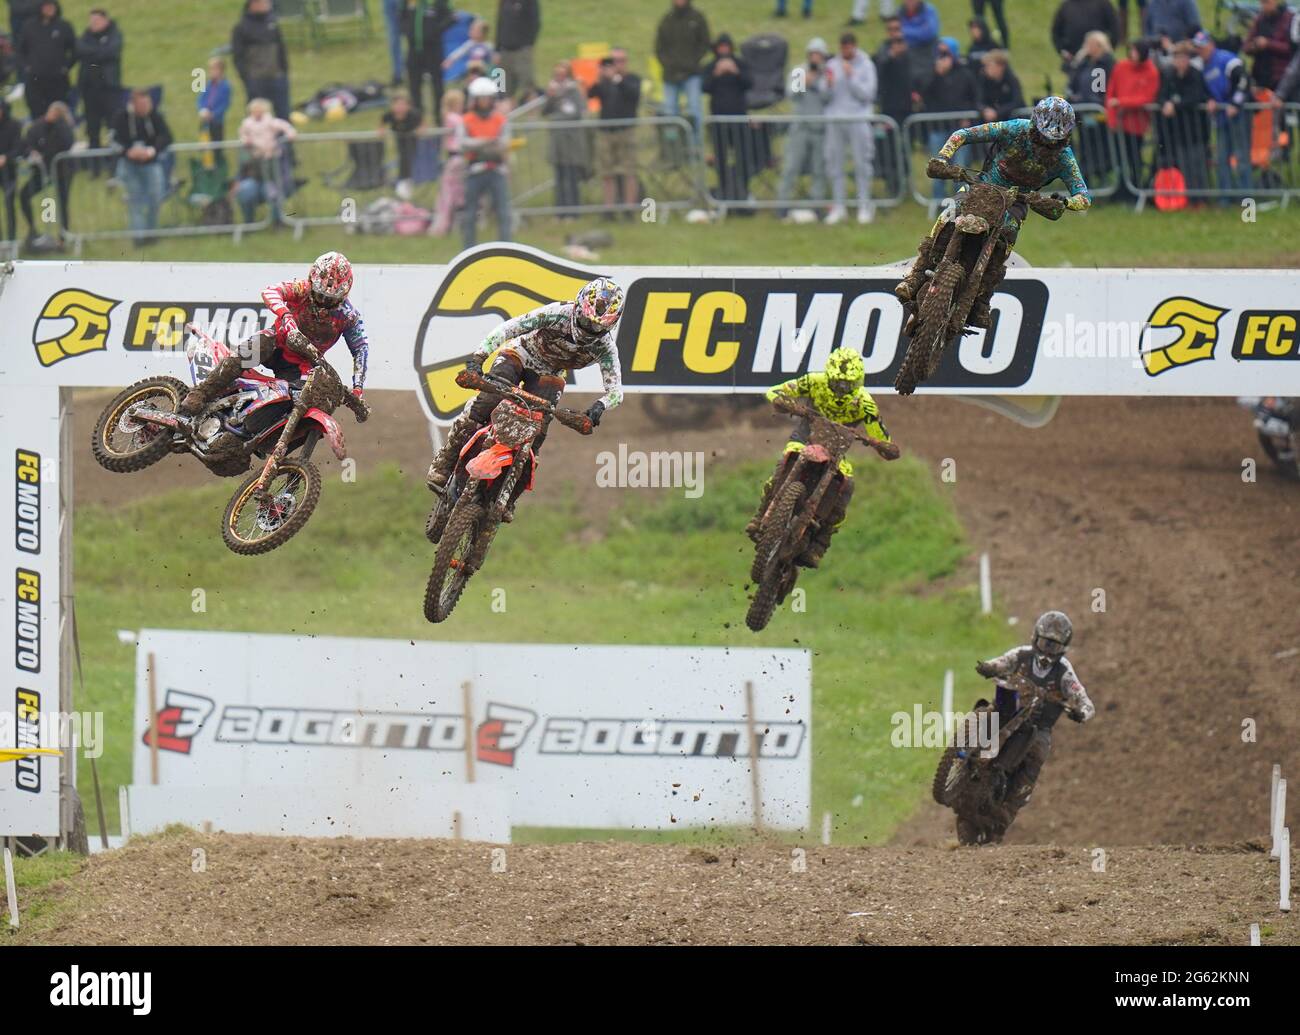 Riders make a jump during MX2 Race 1 in the British leg of the 2021 FIM MotoCross World Championships on Sunday, June 27, 2021, at Matterley Basin, Wi Stock Photo